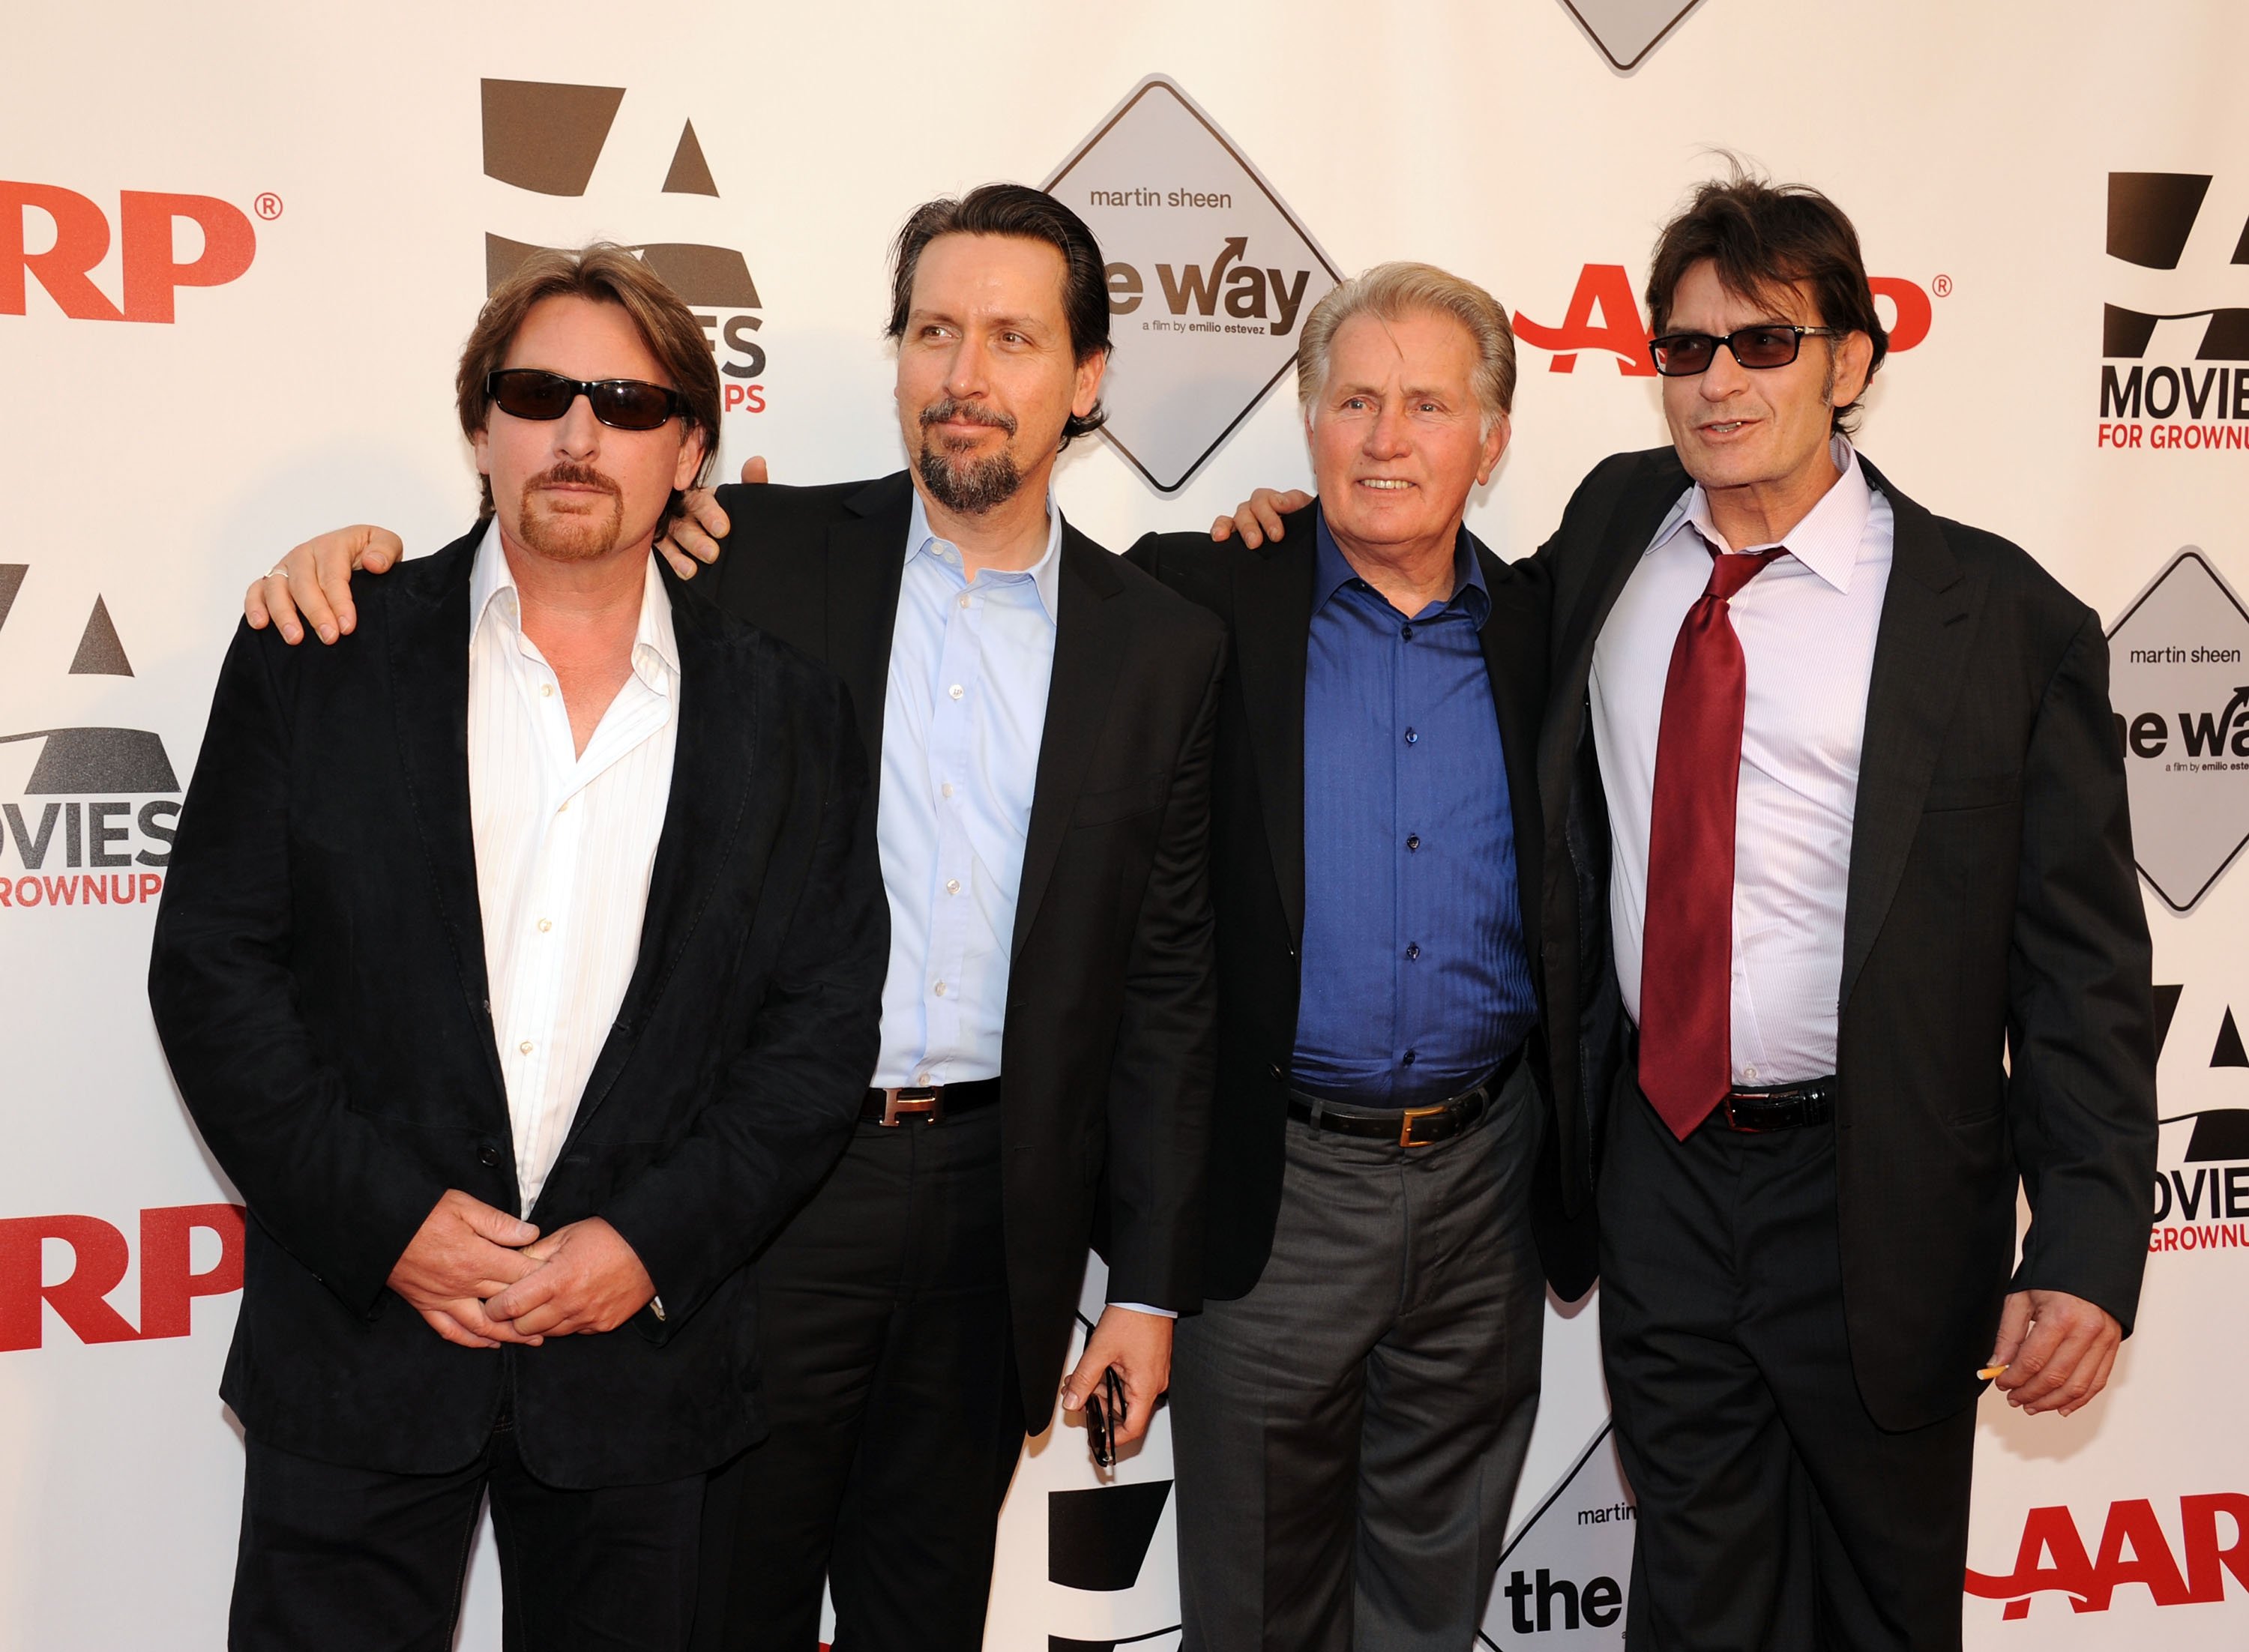  Emilio Estevez, Ramon Estevez, Martin Sheen and Charlie Sheen at Nokia Theatre L.A. Live on September 23, 2011 in Los Angeles, California. | Source: Getty Images